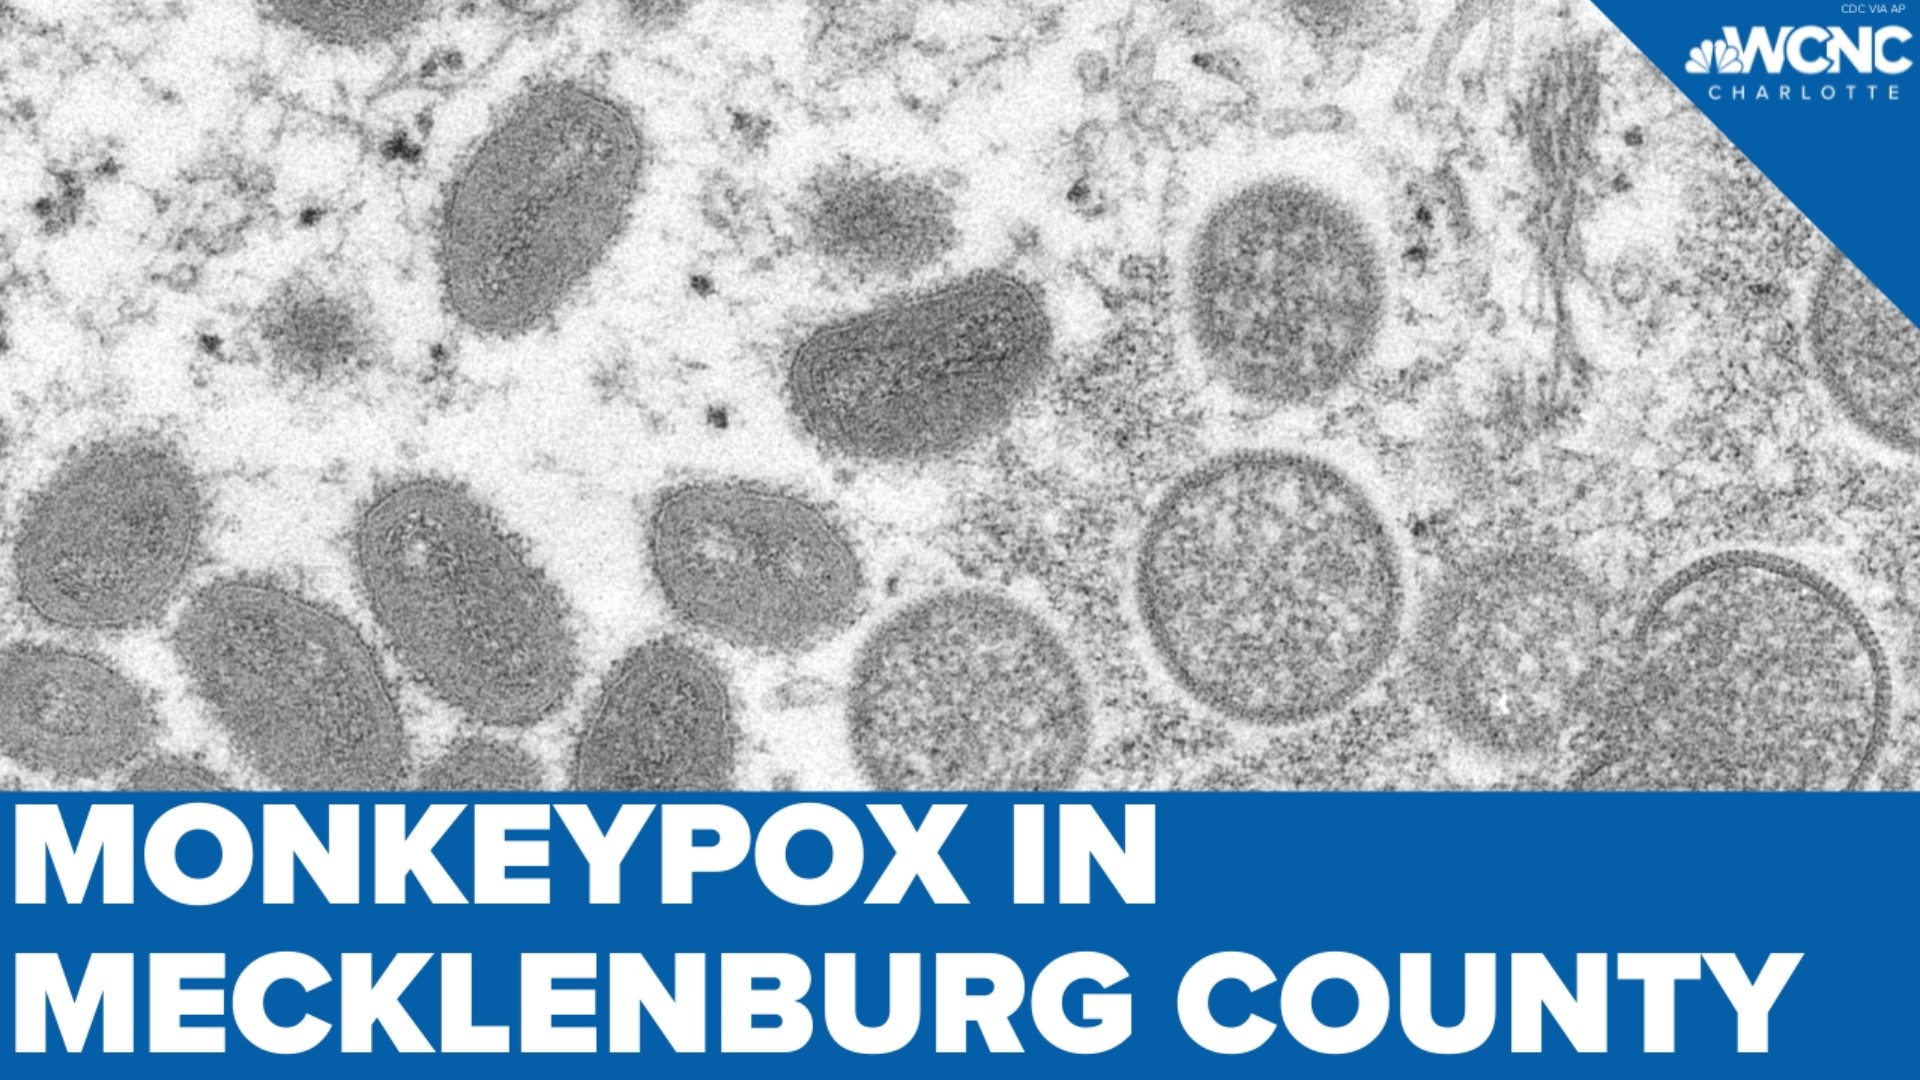 Mecklenburg County Public Health confirms it's first case of Monkeypox. This is the second confirmed case in North Carolina.